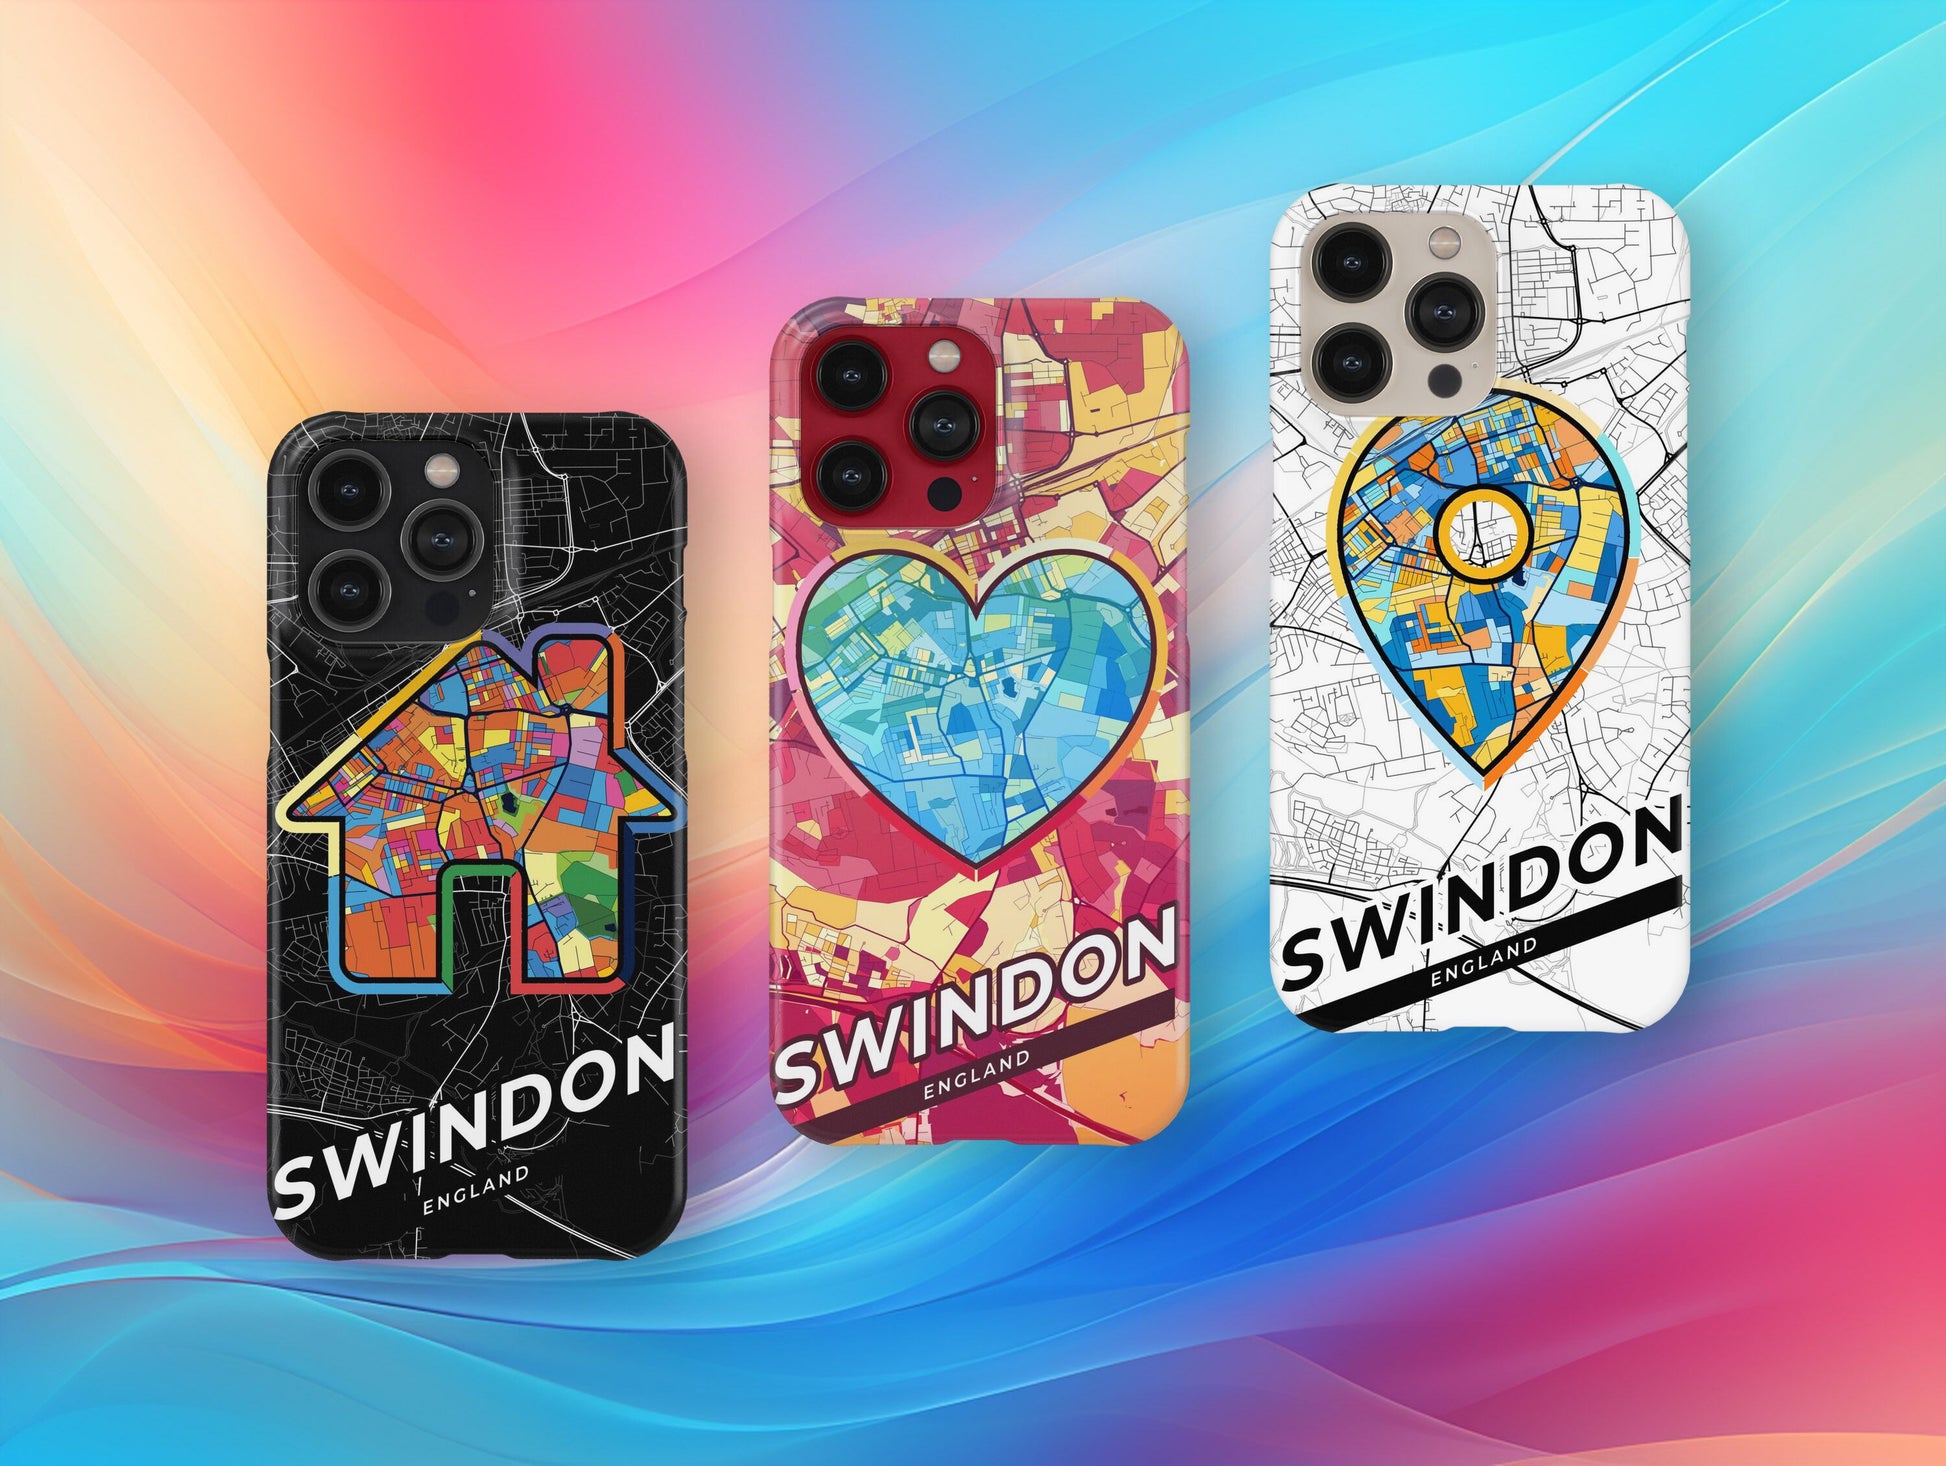 Swindon England slim phone case with colorful icon